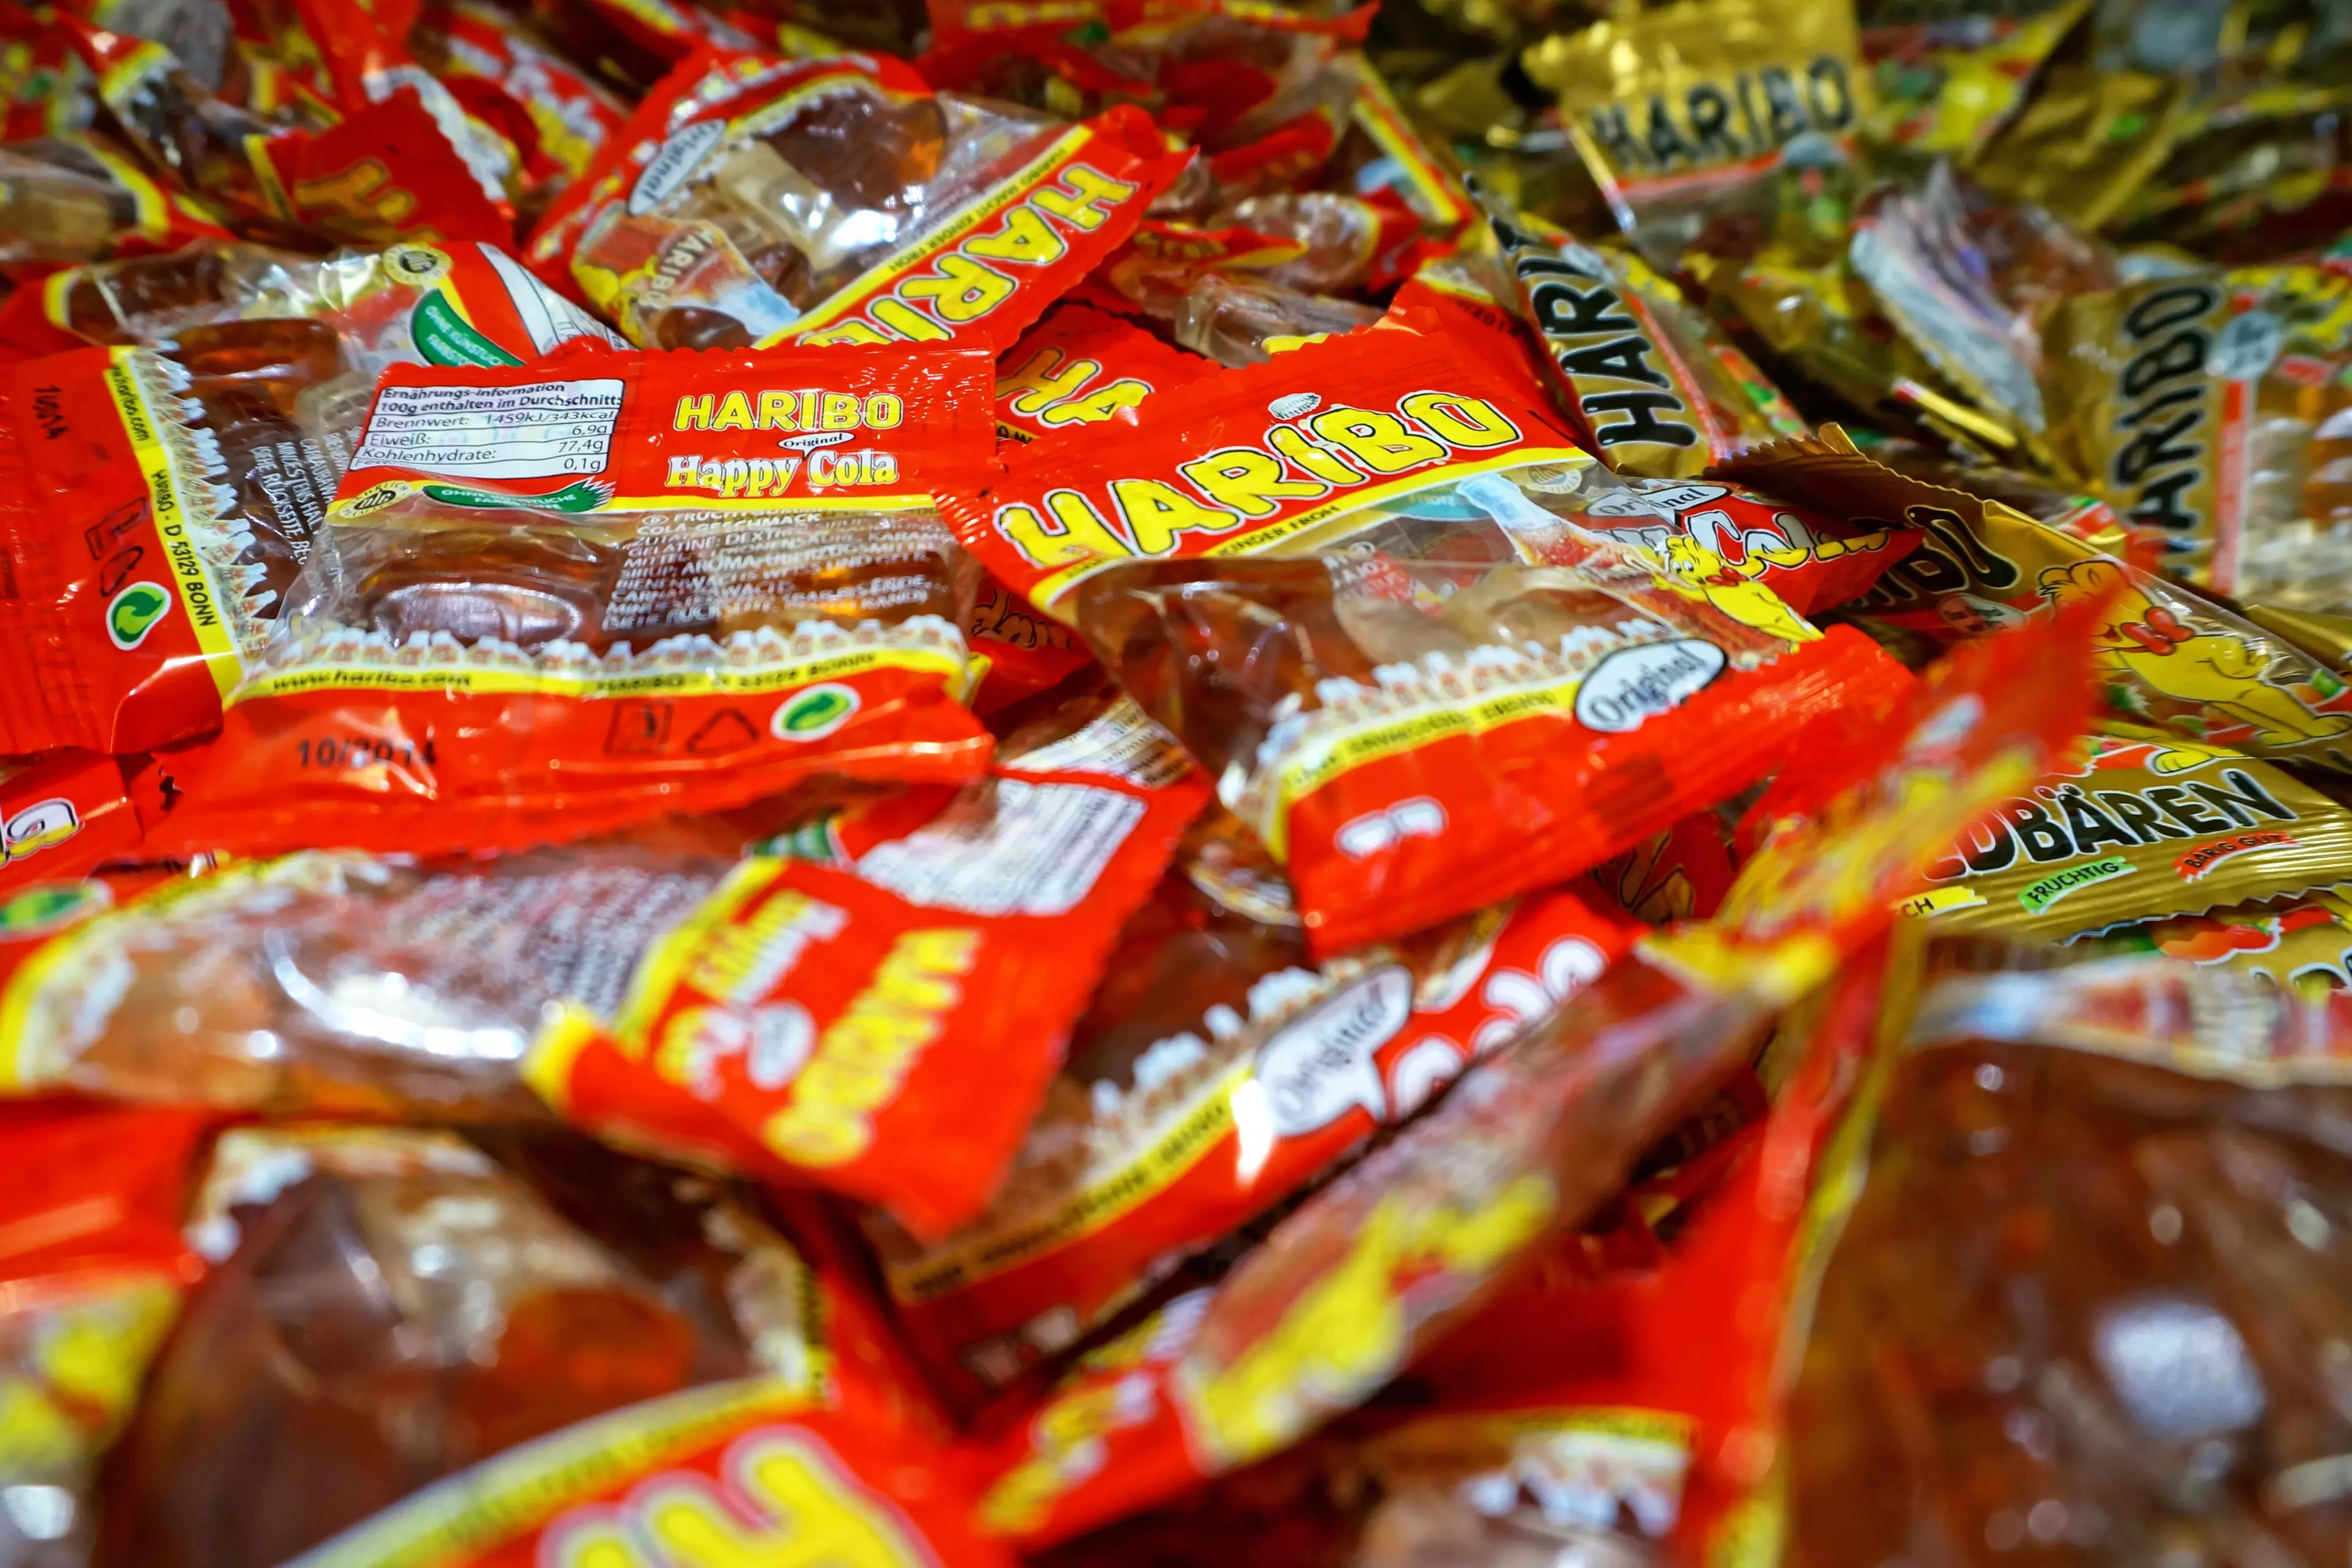 Haribo is one of UK's top choices for sweets (